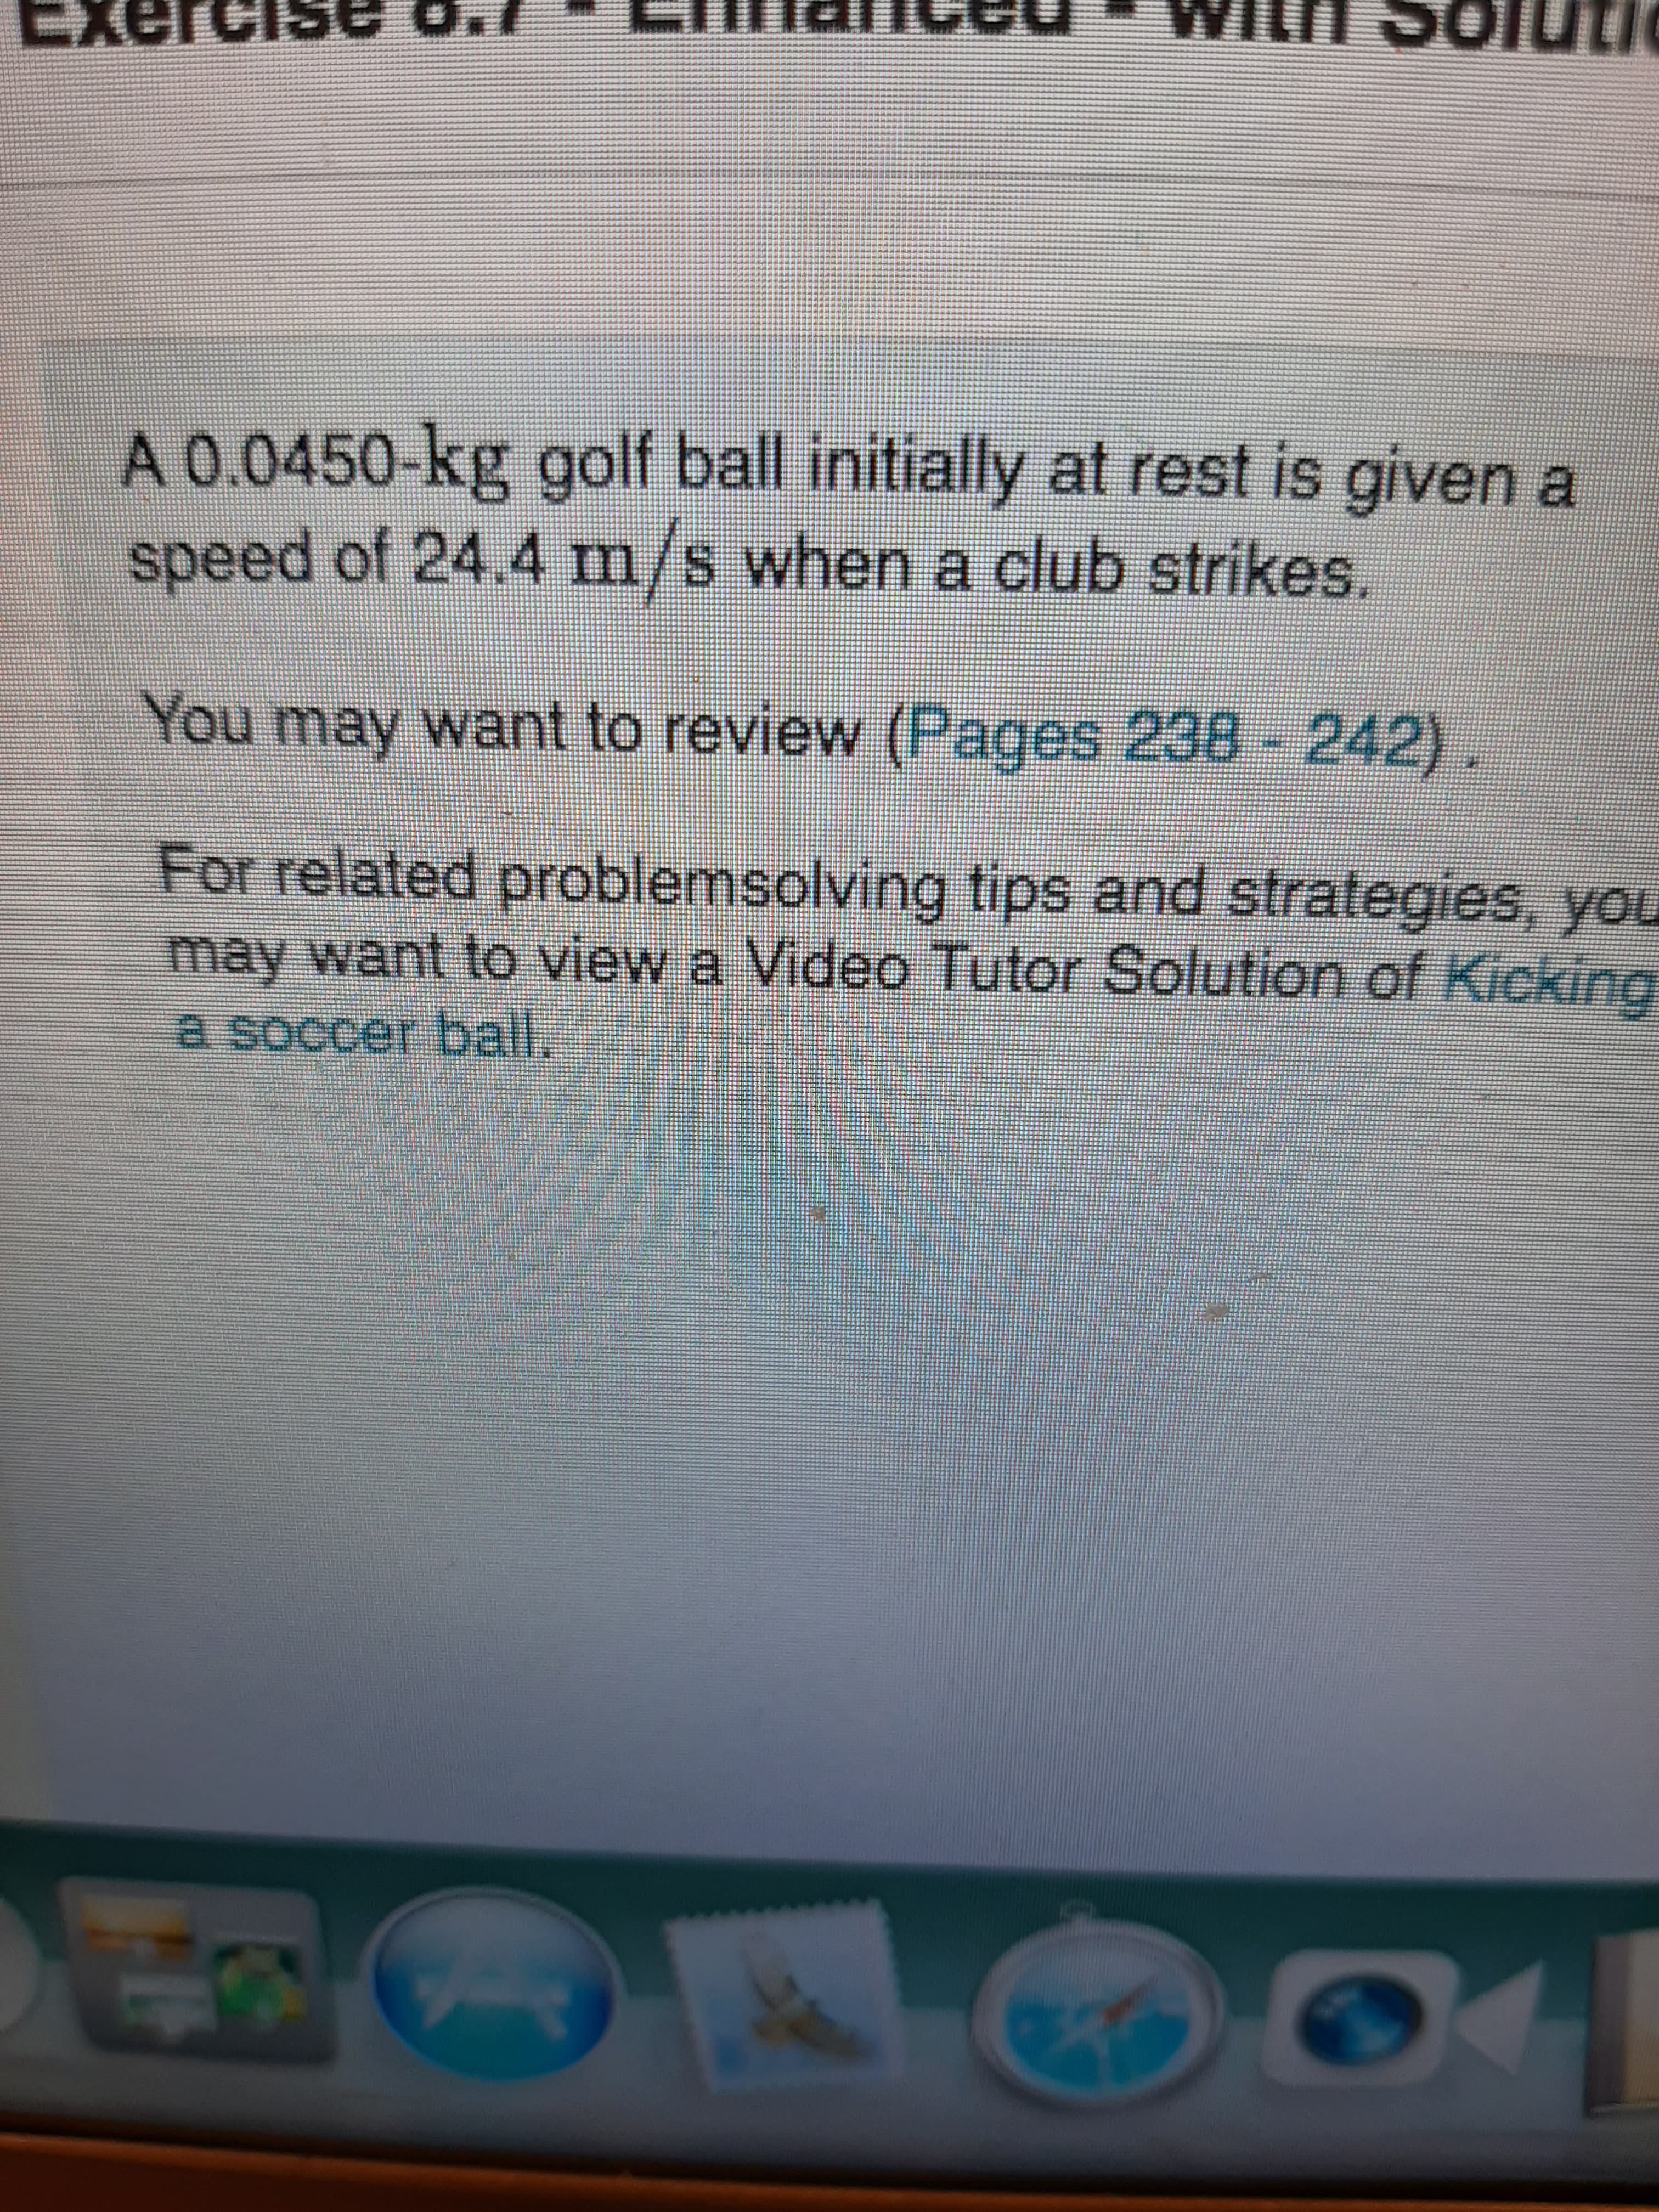 Exert
A 0.0450-kg golf ball initially at rest is given a
speed of 24.4 m/s when a club strikes.
You may want to review (Pages 238- 242).
For related problemsolving tips and strategies, you
may want to view a Video Tutor Solution of Kicking
a soccer ball.
